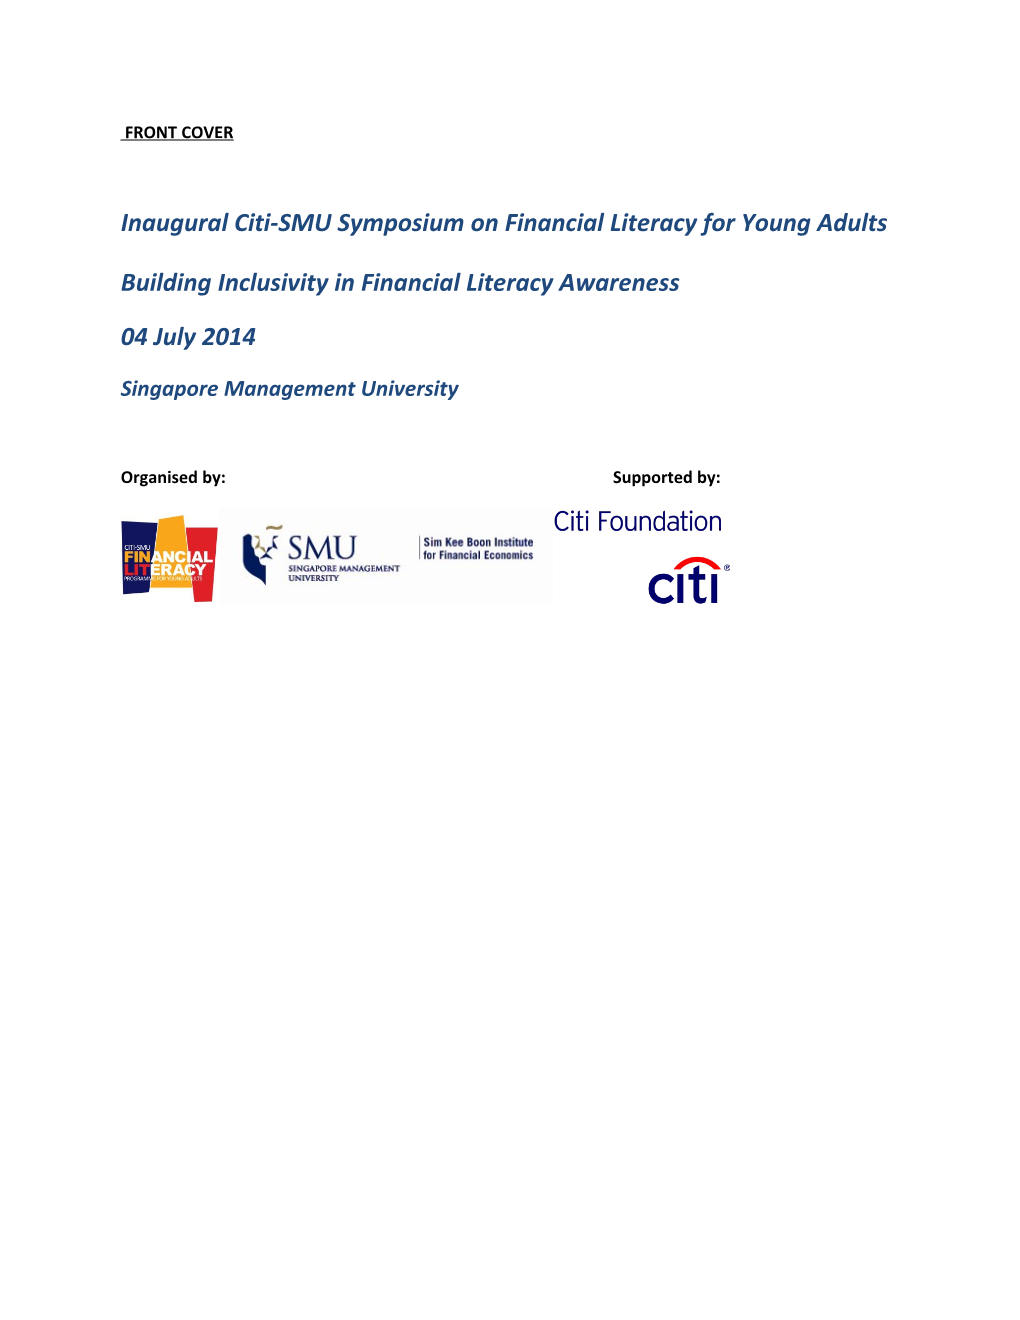 Inaugural Citi-SMU Symposium on Financial Literacy for Young Adults